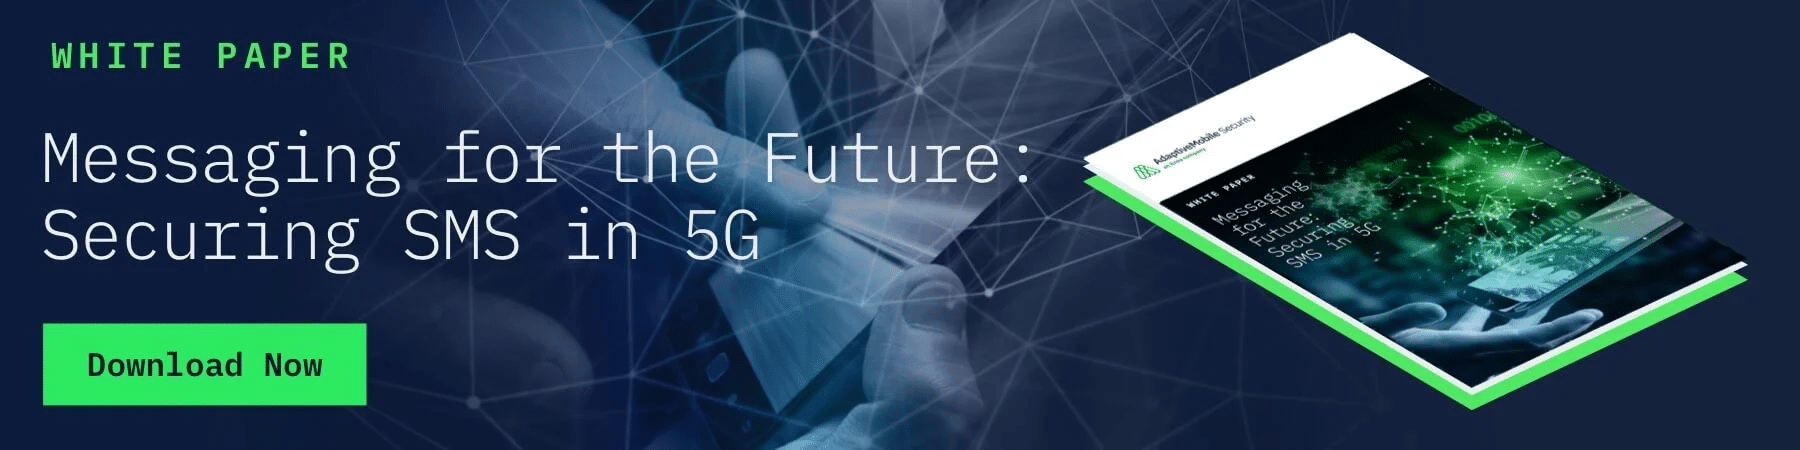 Blog_Banner_Future_Securing_SMS_in_5G_Whitepaper